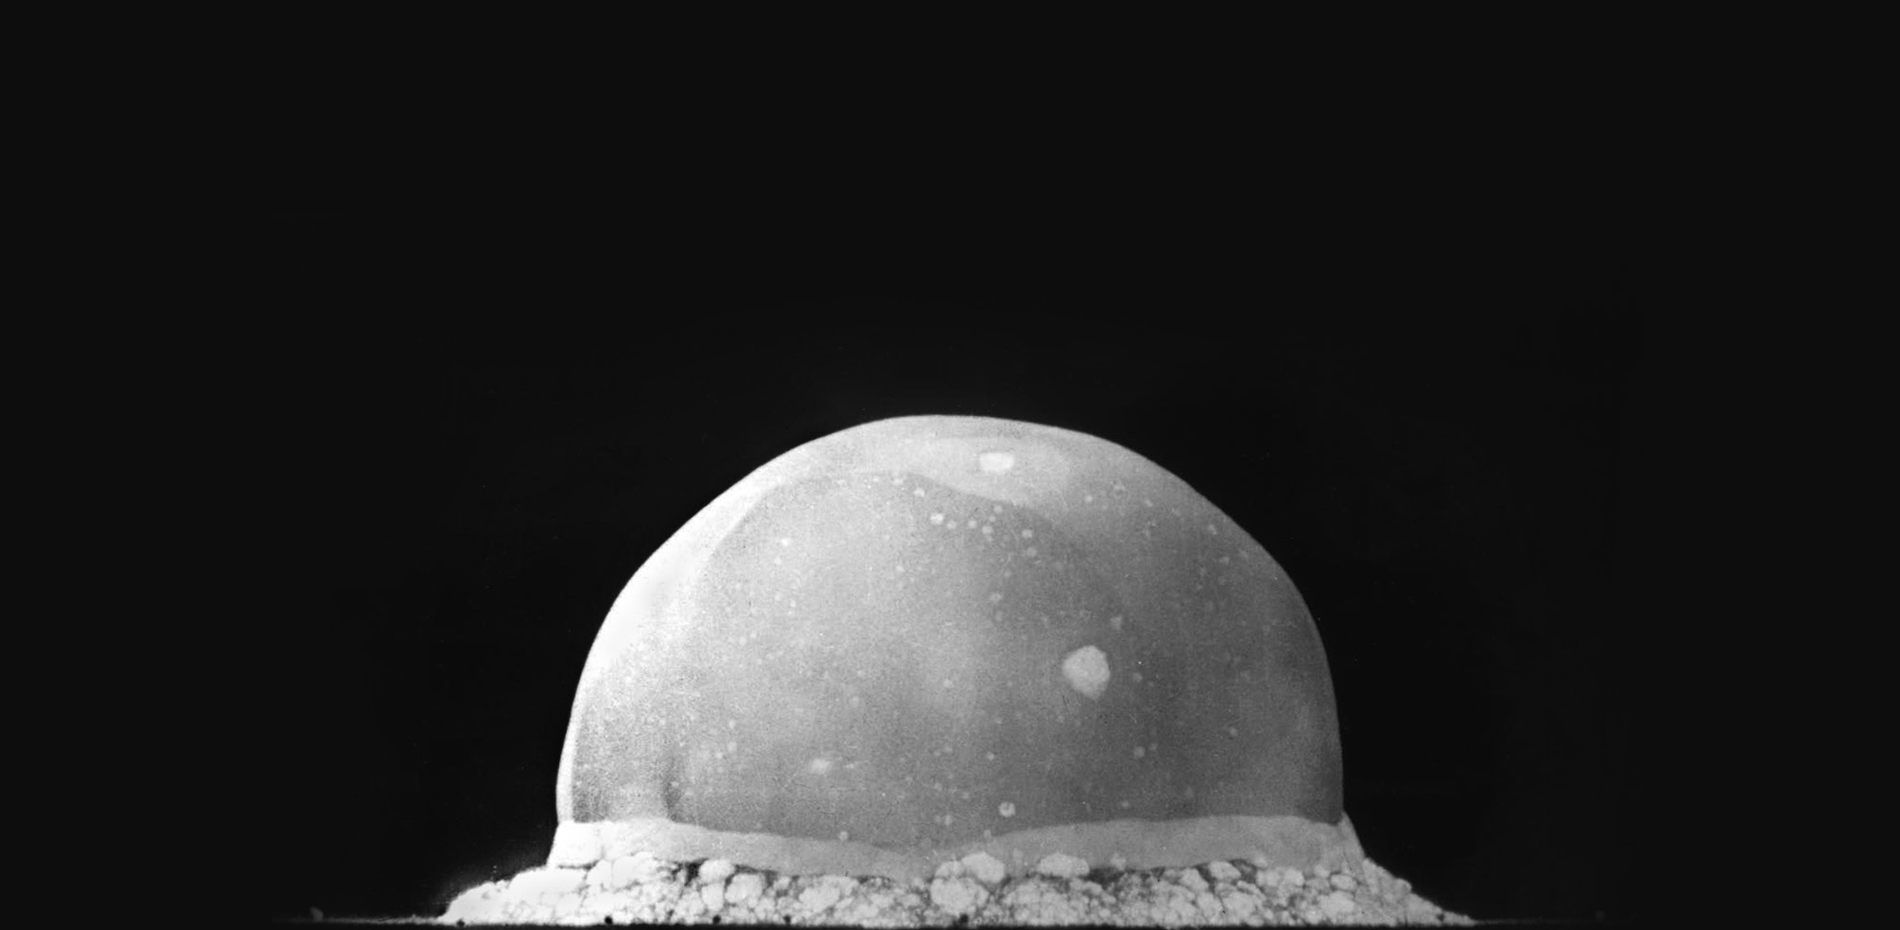 PHOTO: The Manhattan Project's efforts to build the first atomic bomb led to the Trinity test on July 16, 1945.